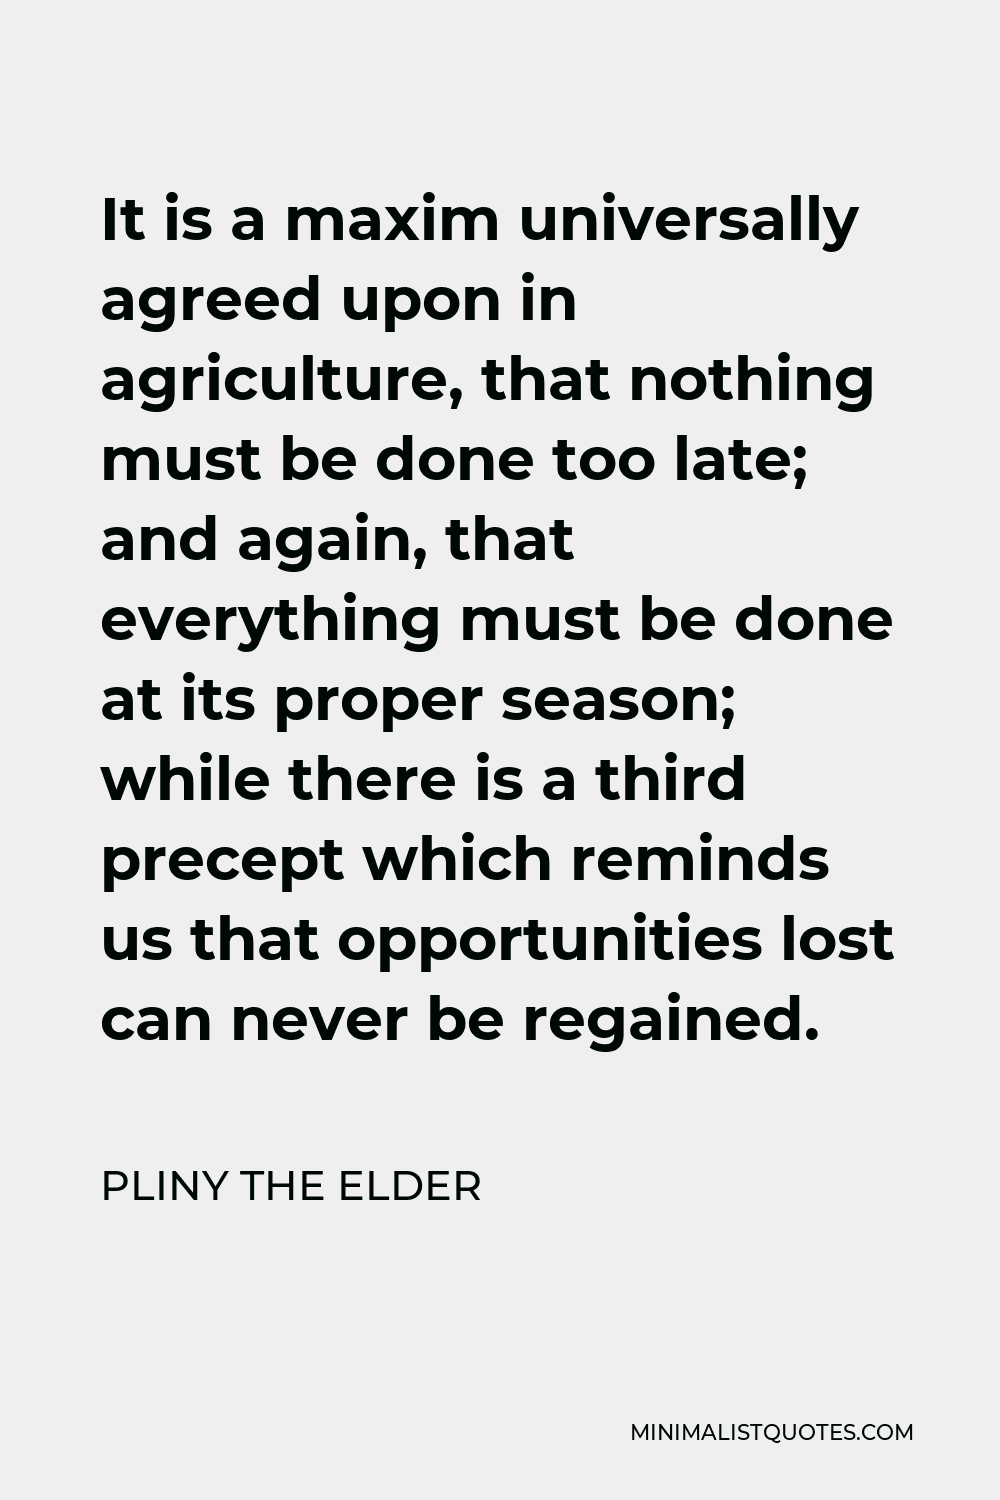 Pliny the Elder Quote - It is a maxim universally agreed upon in agriculture, that nothing must be done too late; and again, that everything must be done at its proper season; while there is a third precept which reminds us that opportunities lost can never be regained.